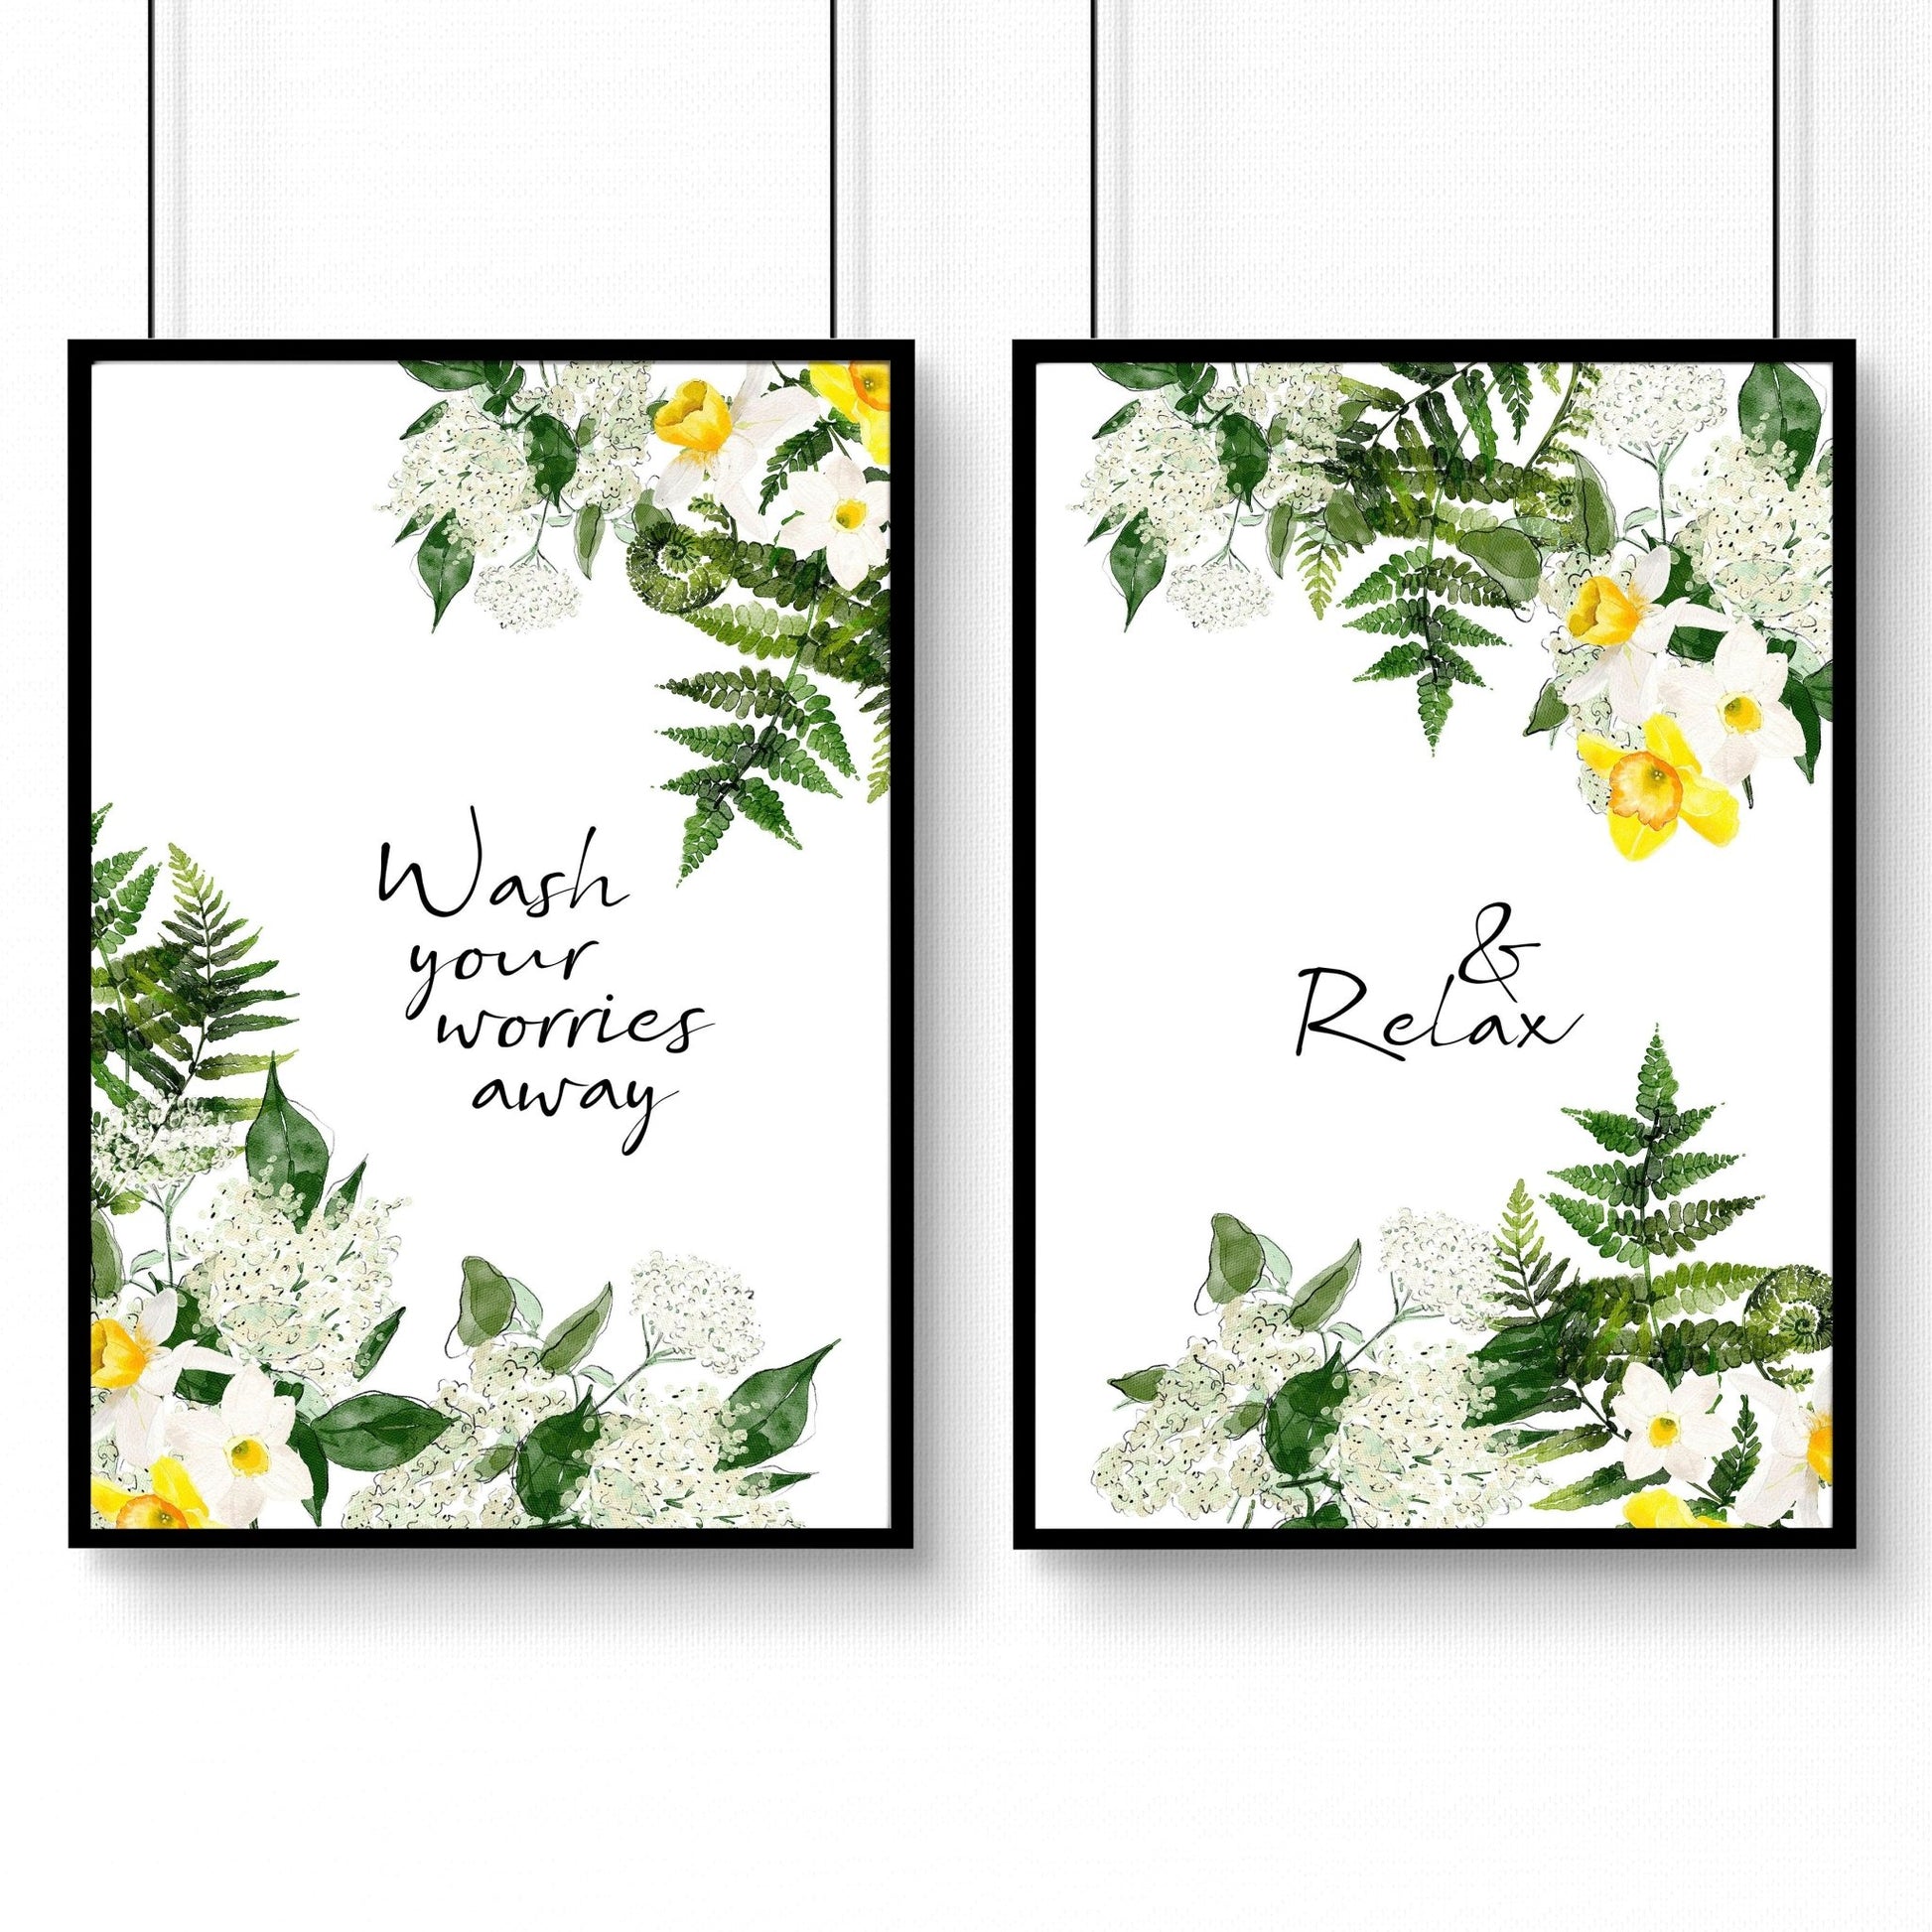 Small pictures for bathroom | set of 2 wall art prints